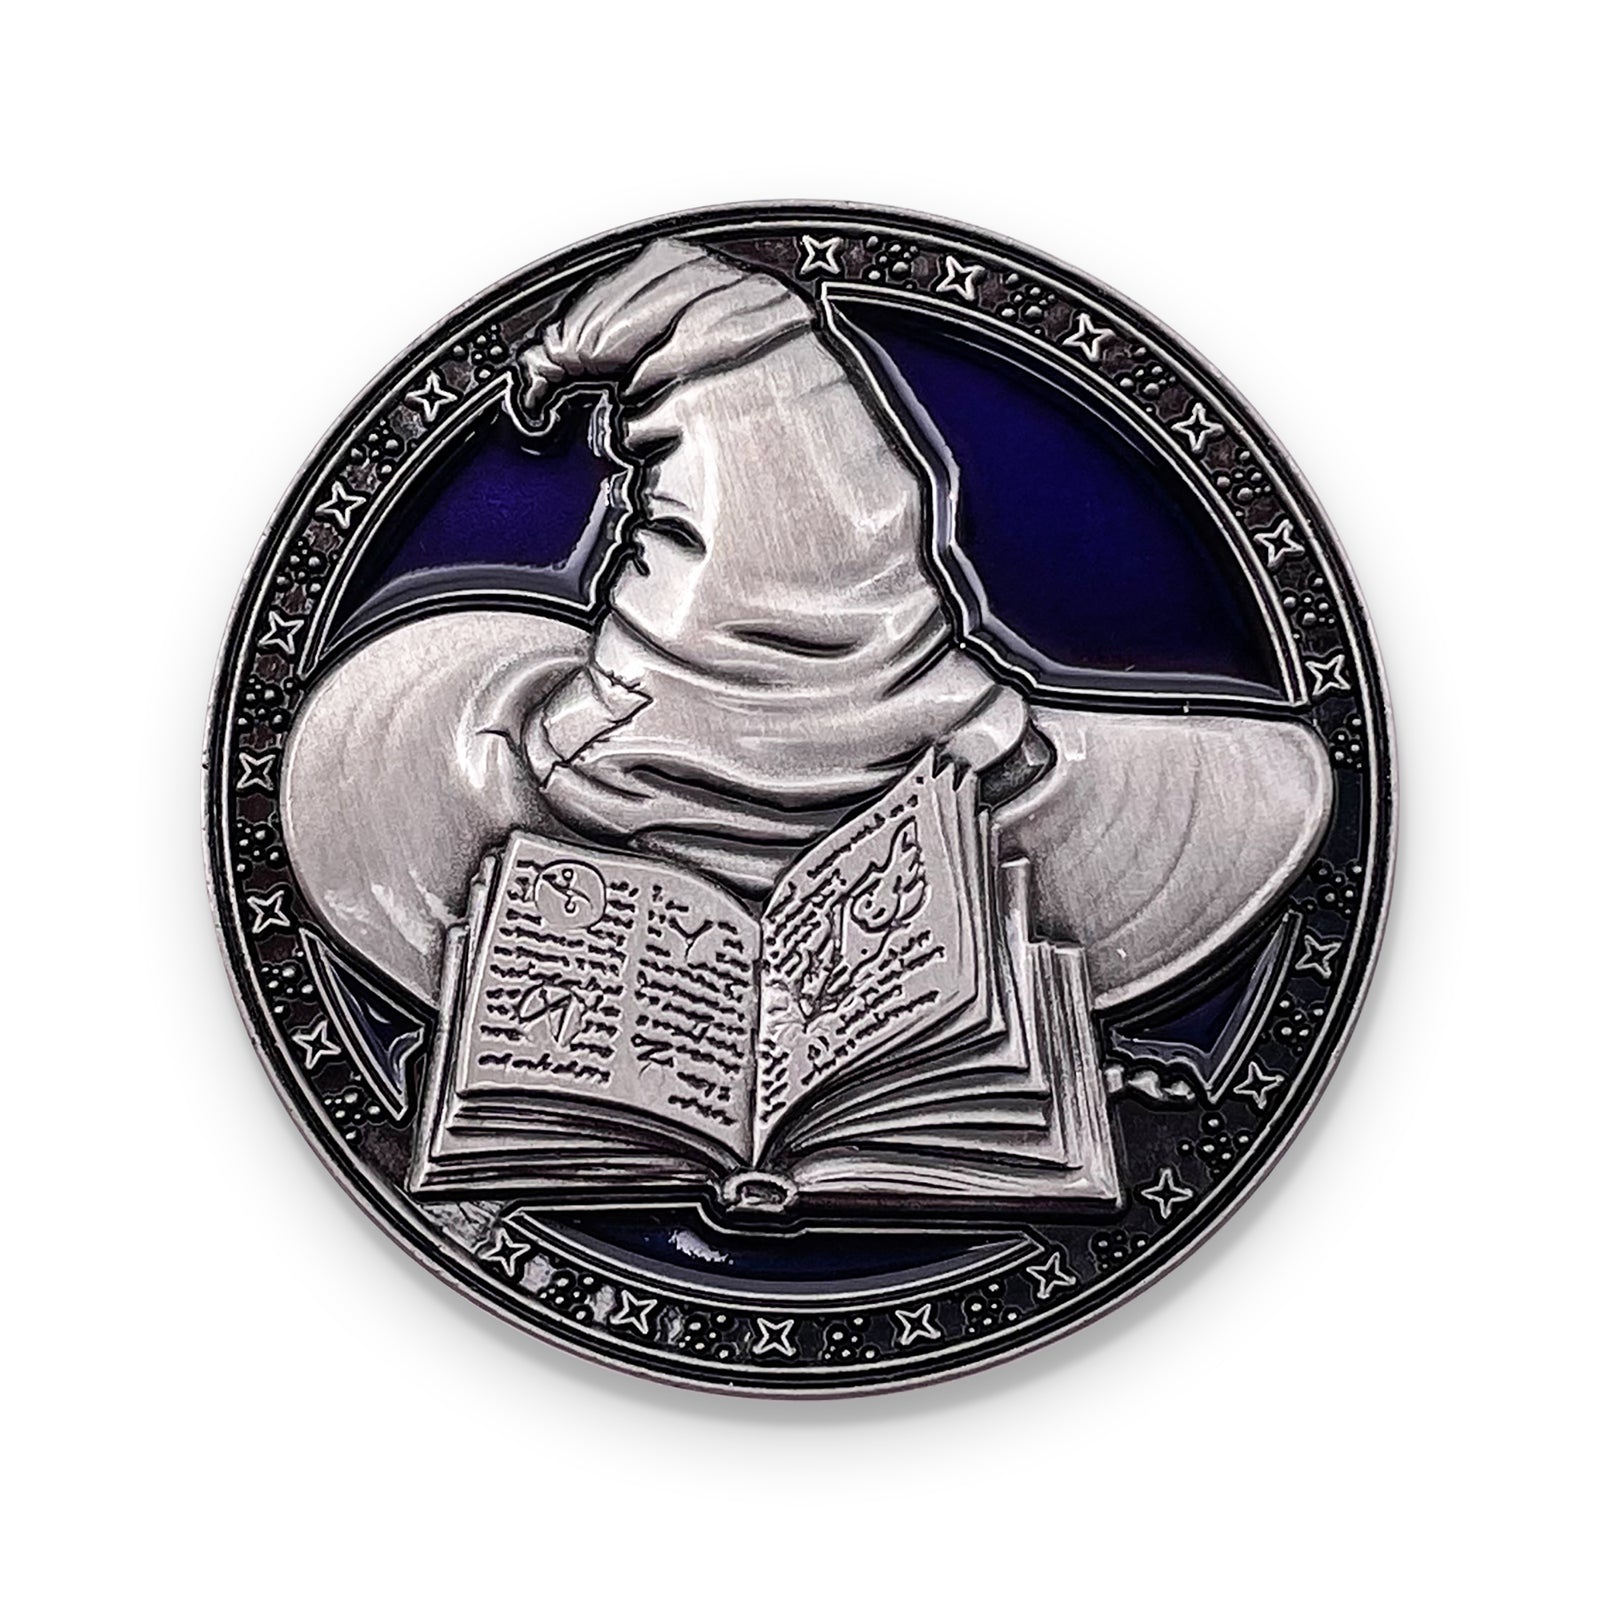 Wizard - Single 45mm Profession Coin